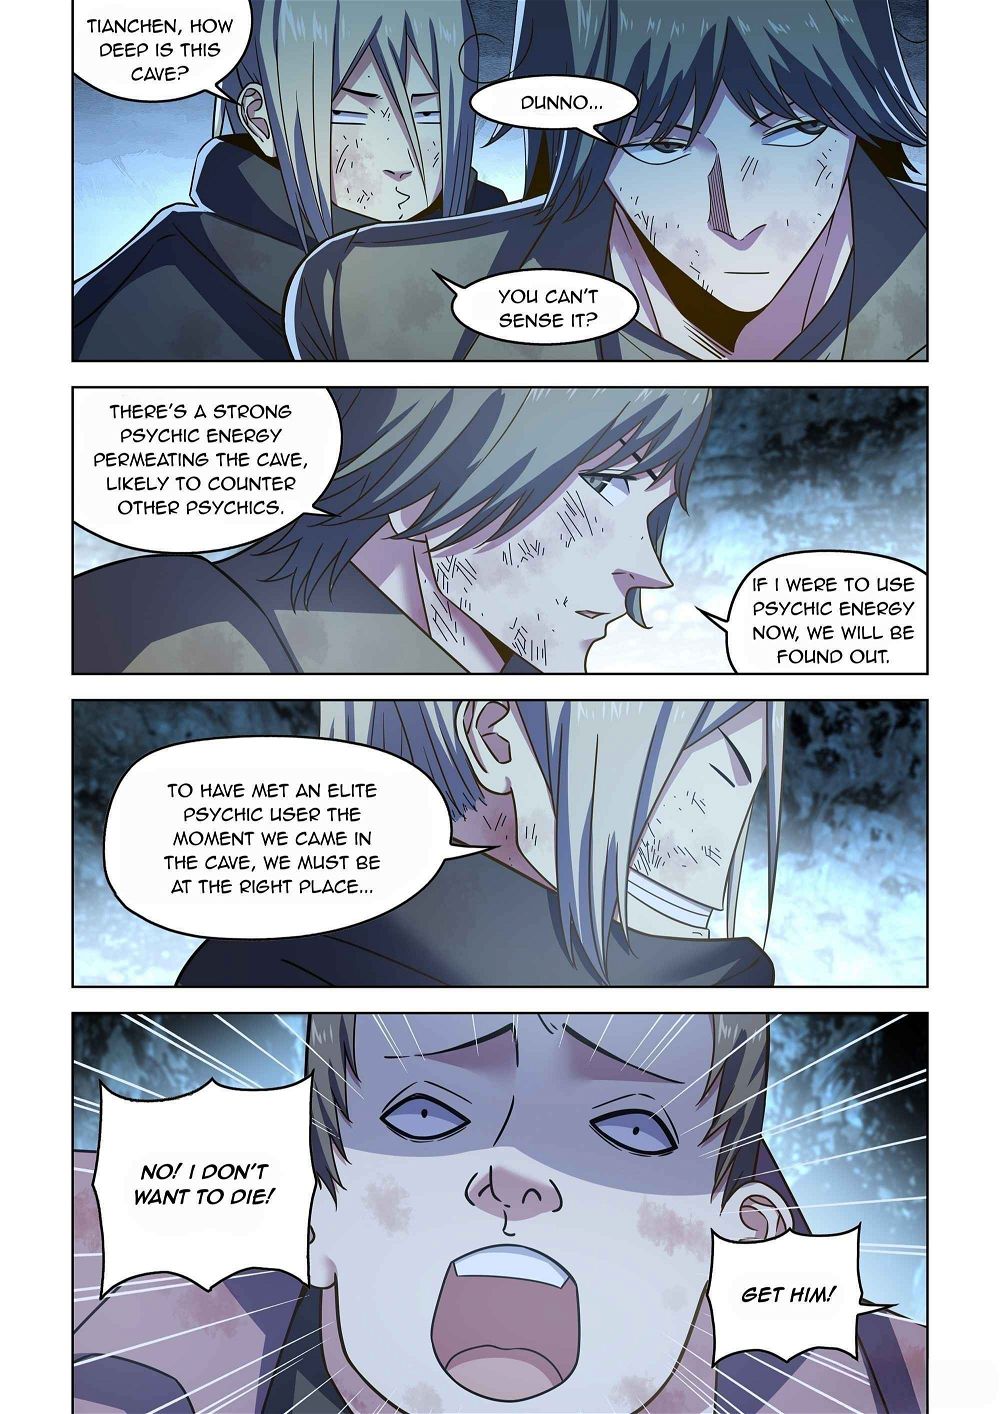 The Last Human Chapter 536 - Page 7